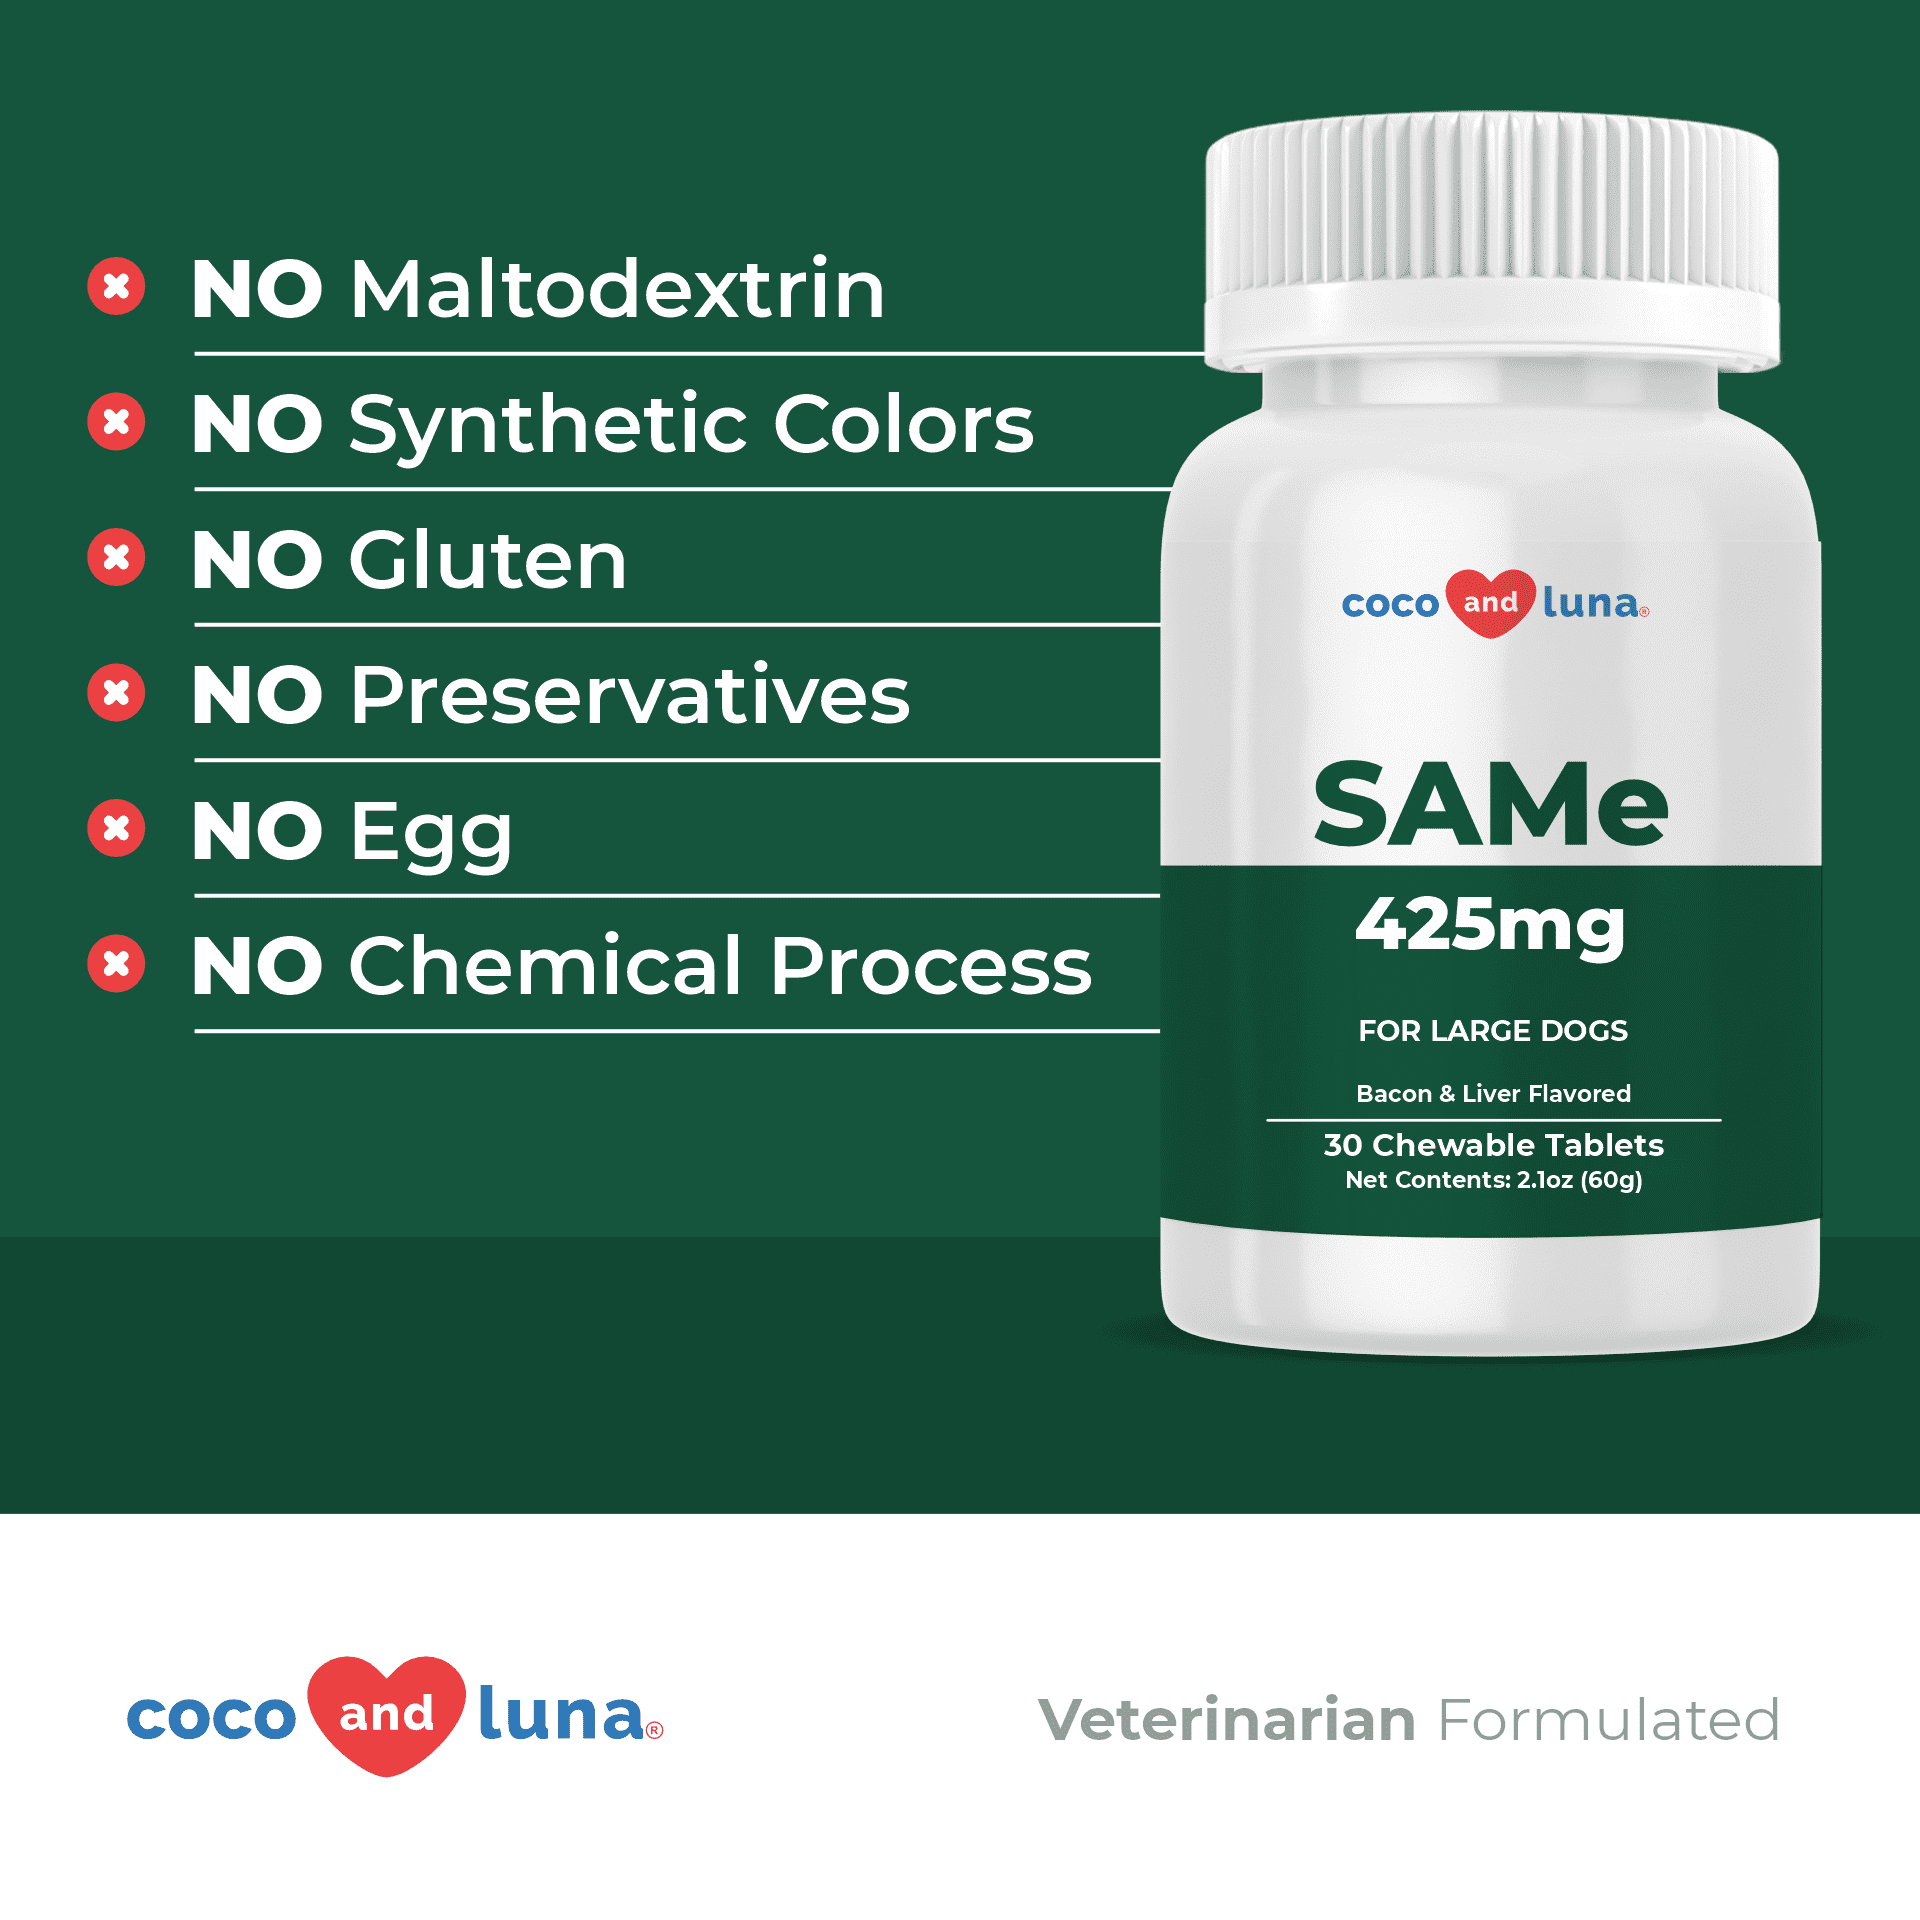 Same for Large Dogs - S-Adenosyl-L-Methionine, Same 425mg, Promotes Cognitive Support, Dog Liver Support Supplement (Veterinarian Formulated, Large Dogs) - Coco and Luna